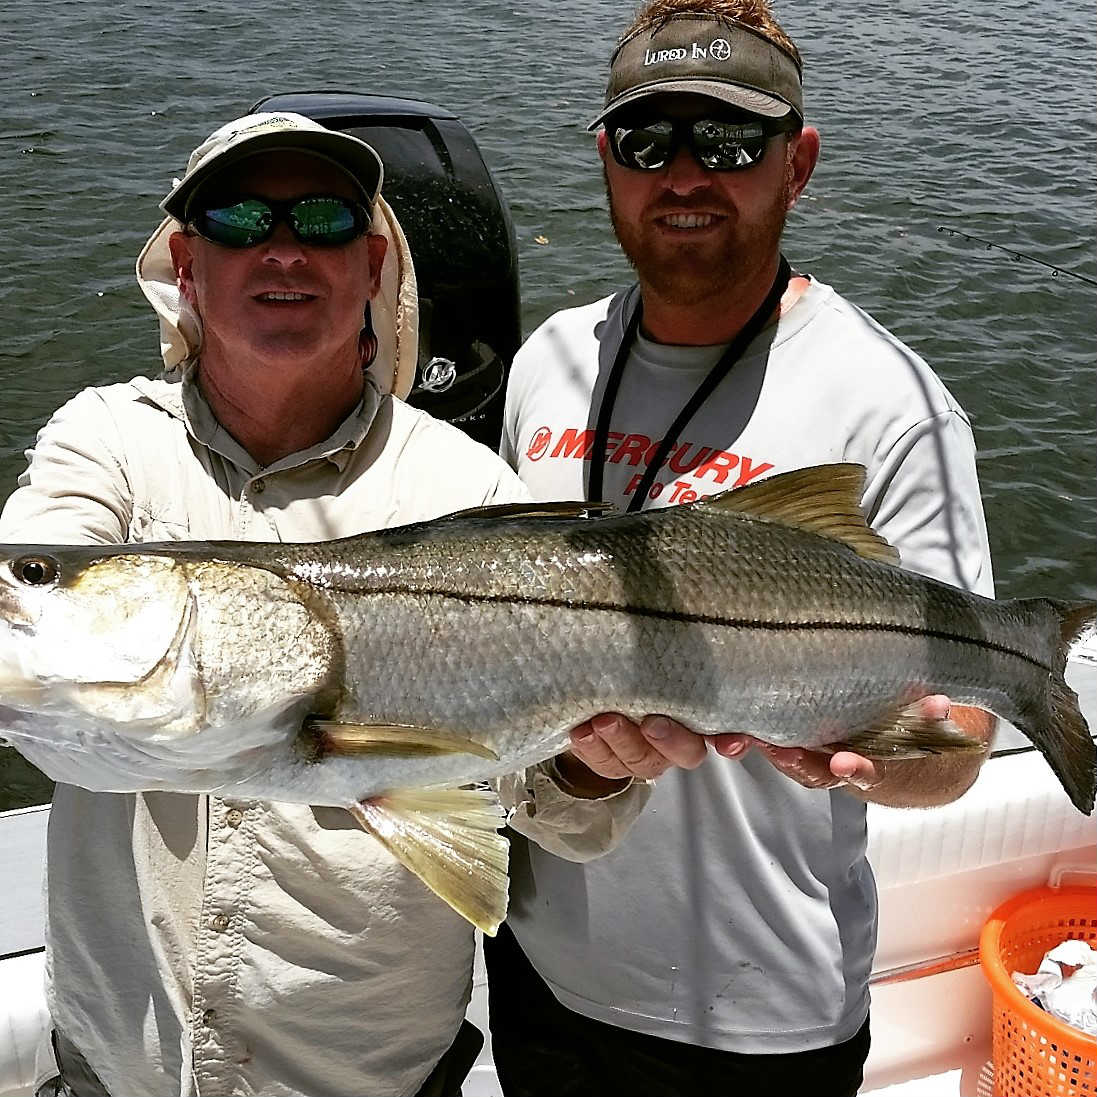 Tarpon Snook Snapper And Much More!